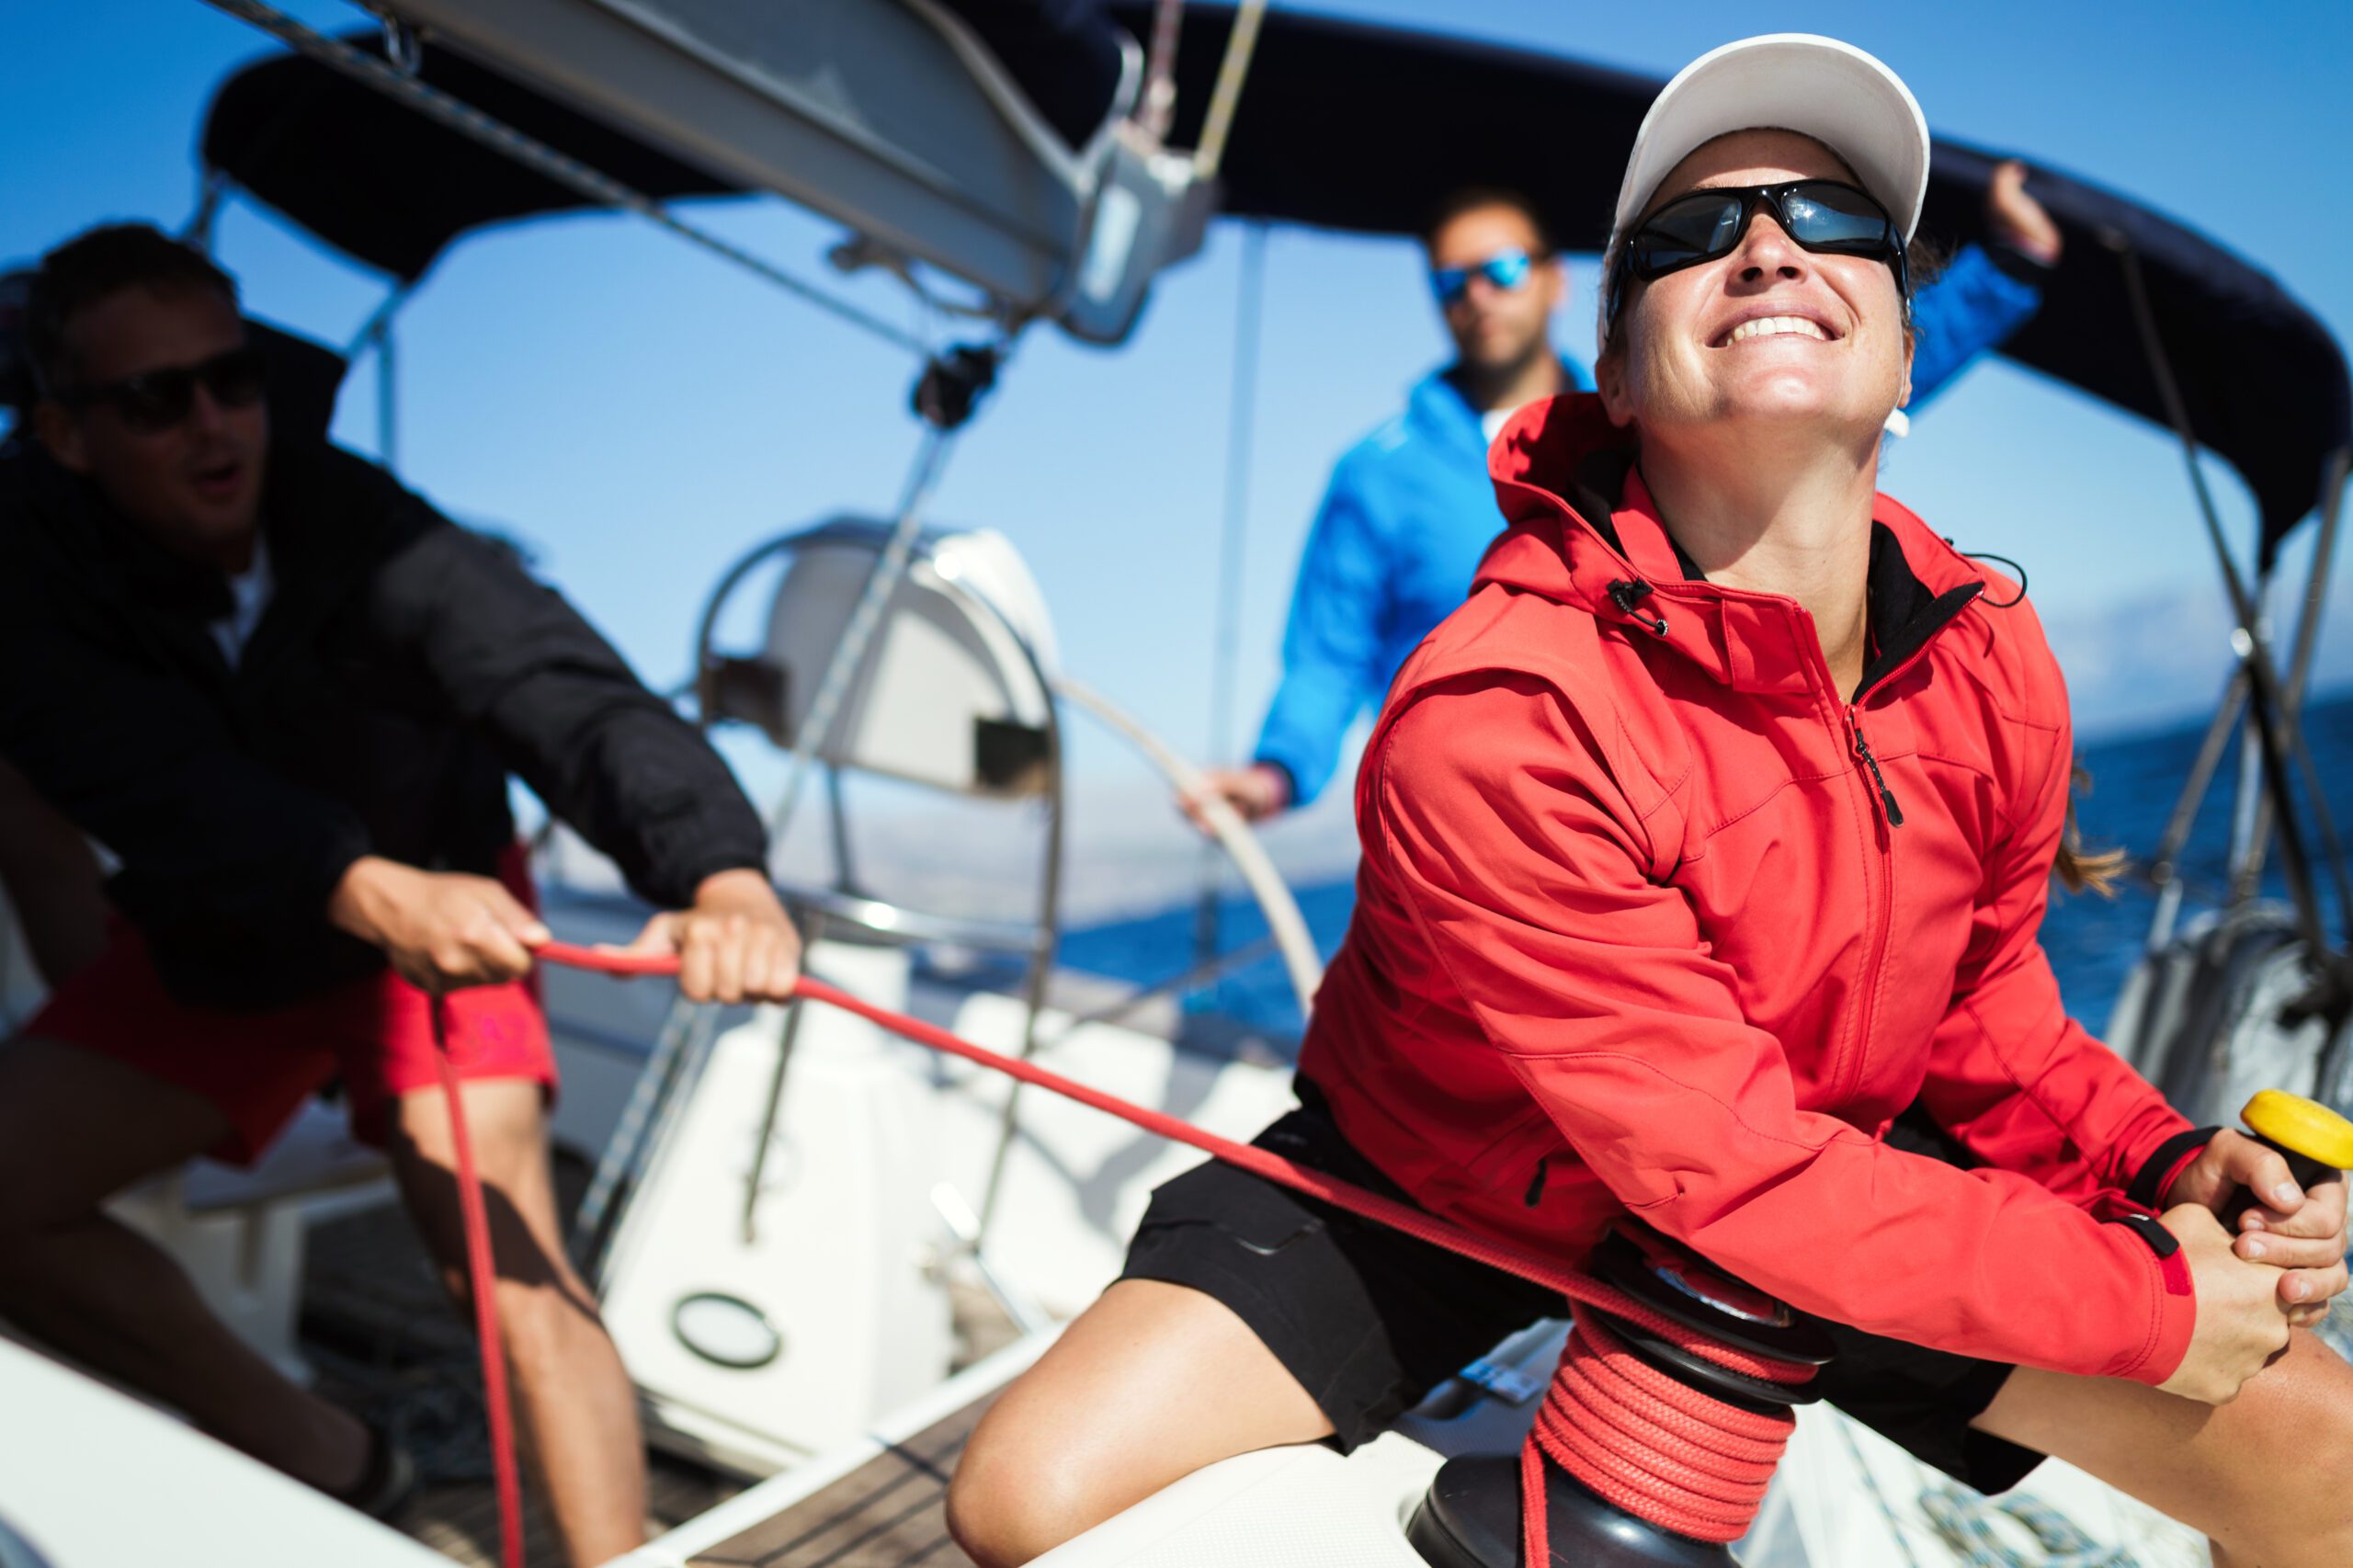 woman in a red jacket, smiling, and sailing a boat